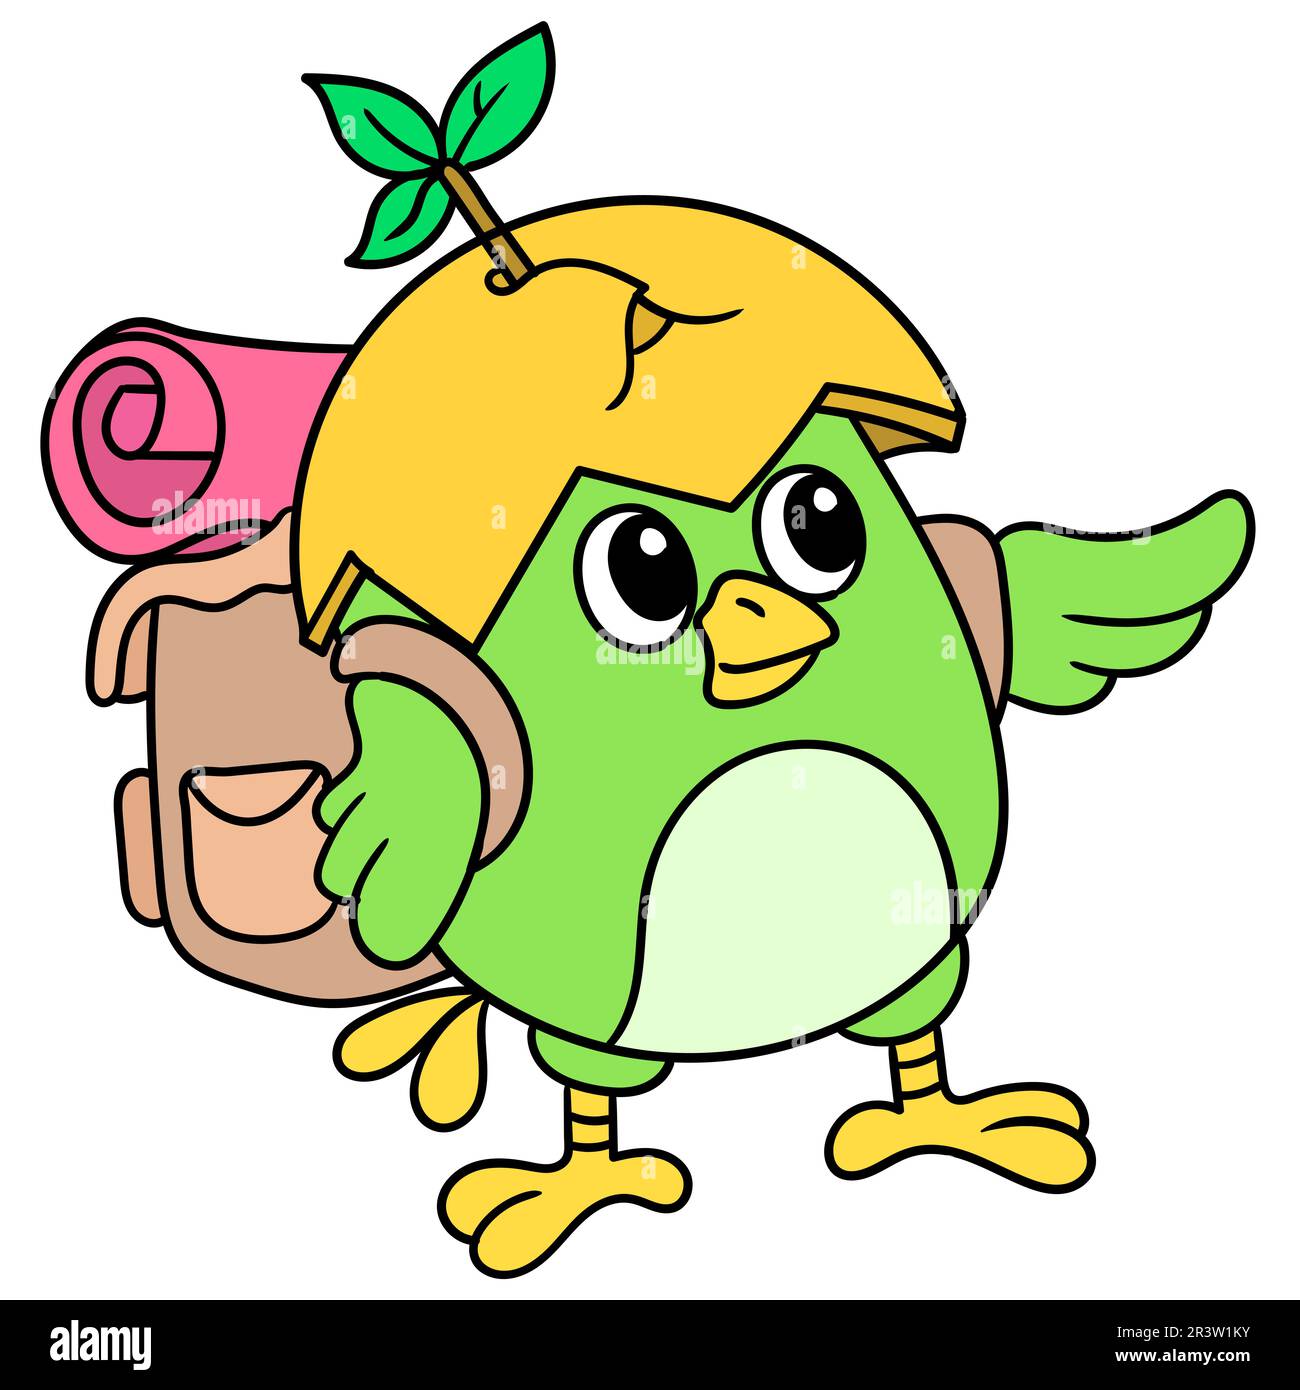 Adventurous chicks look for new things, doodle icon image kawaii Stock Photo